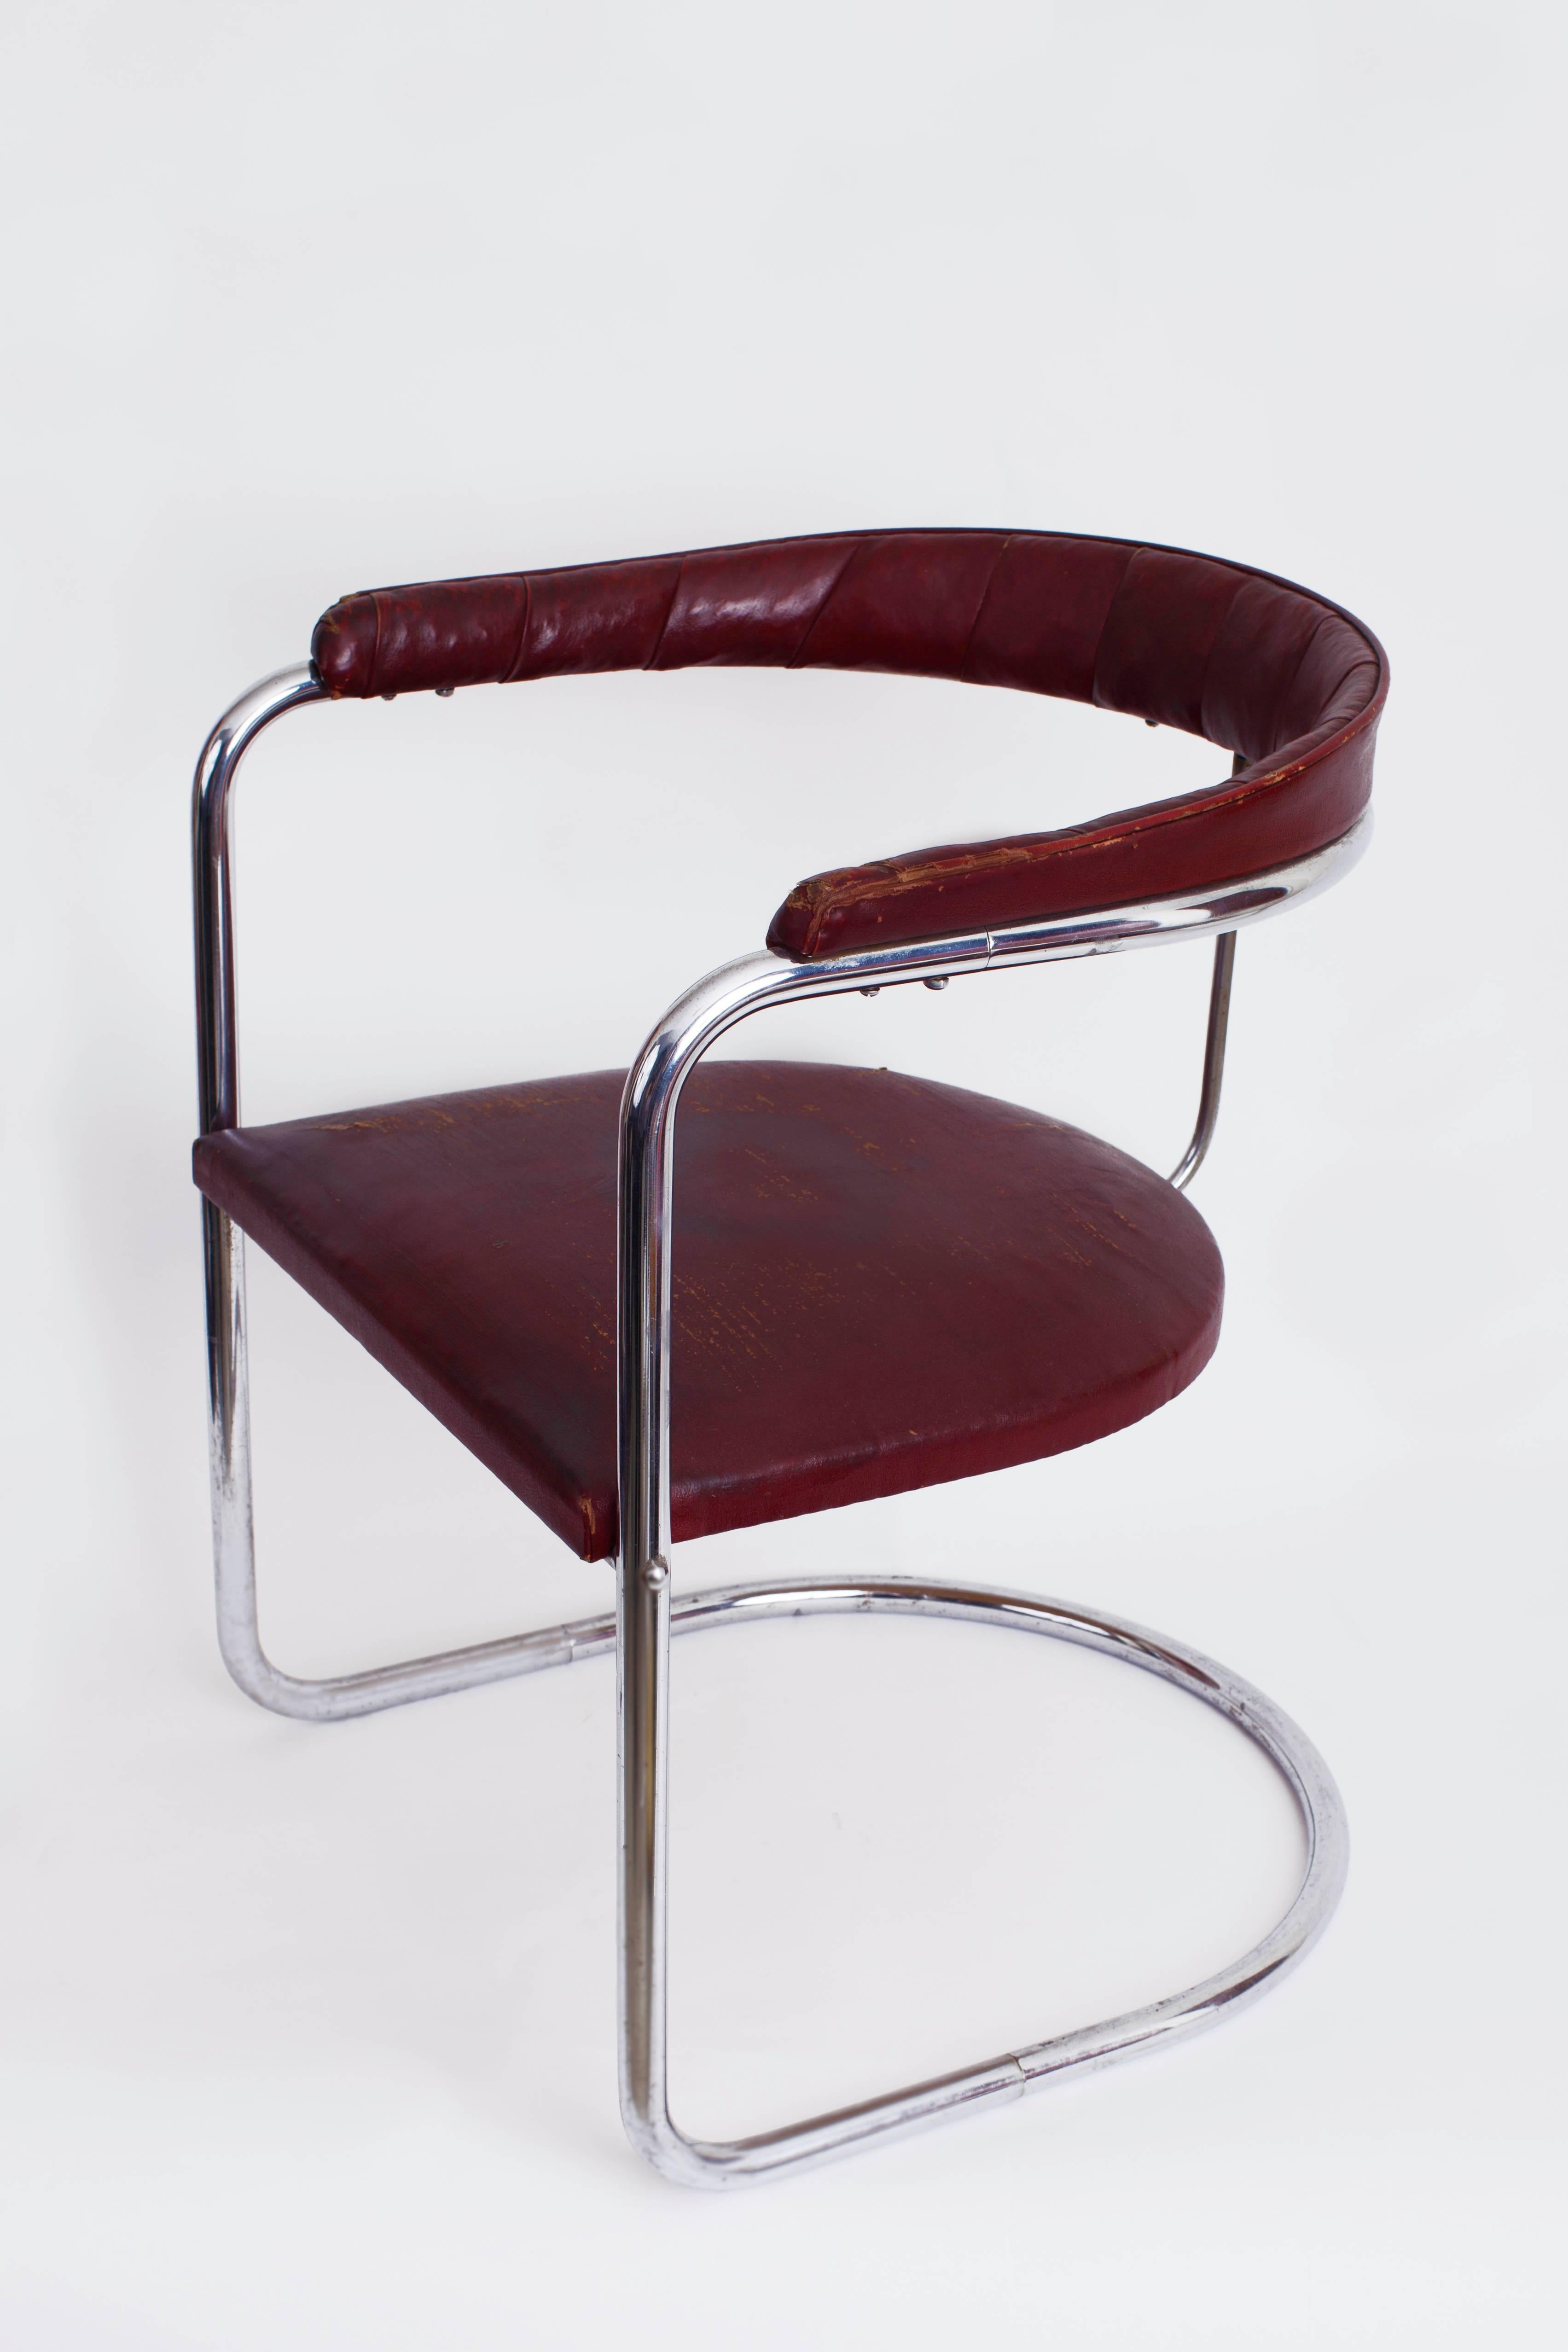 Original Anton Lorenz for Thonet Cantilevered Steel Tube SS33 Chair, 1930s In Good Condition For Sale In New York, NY